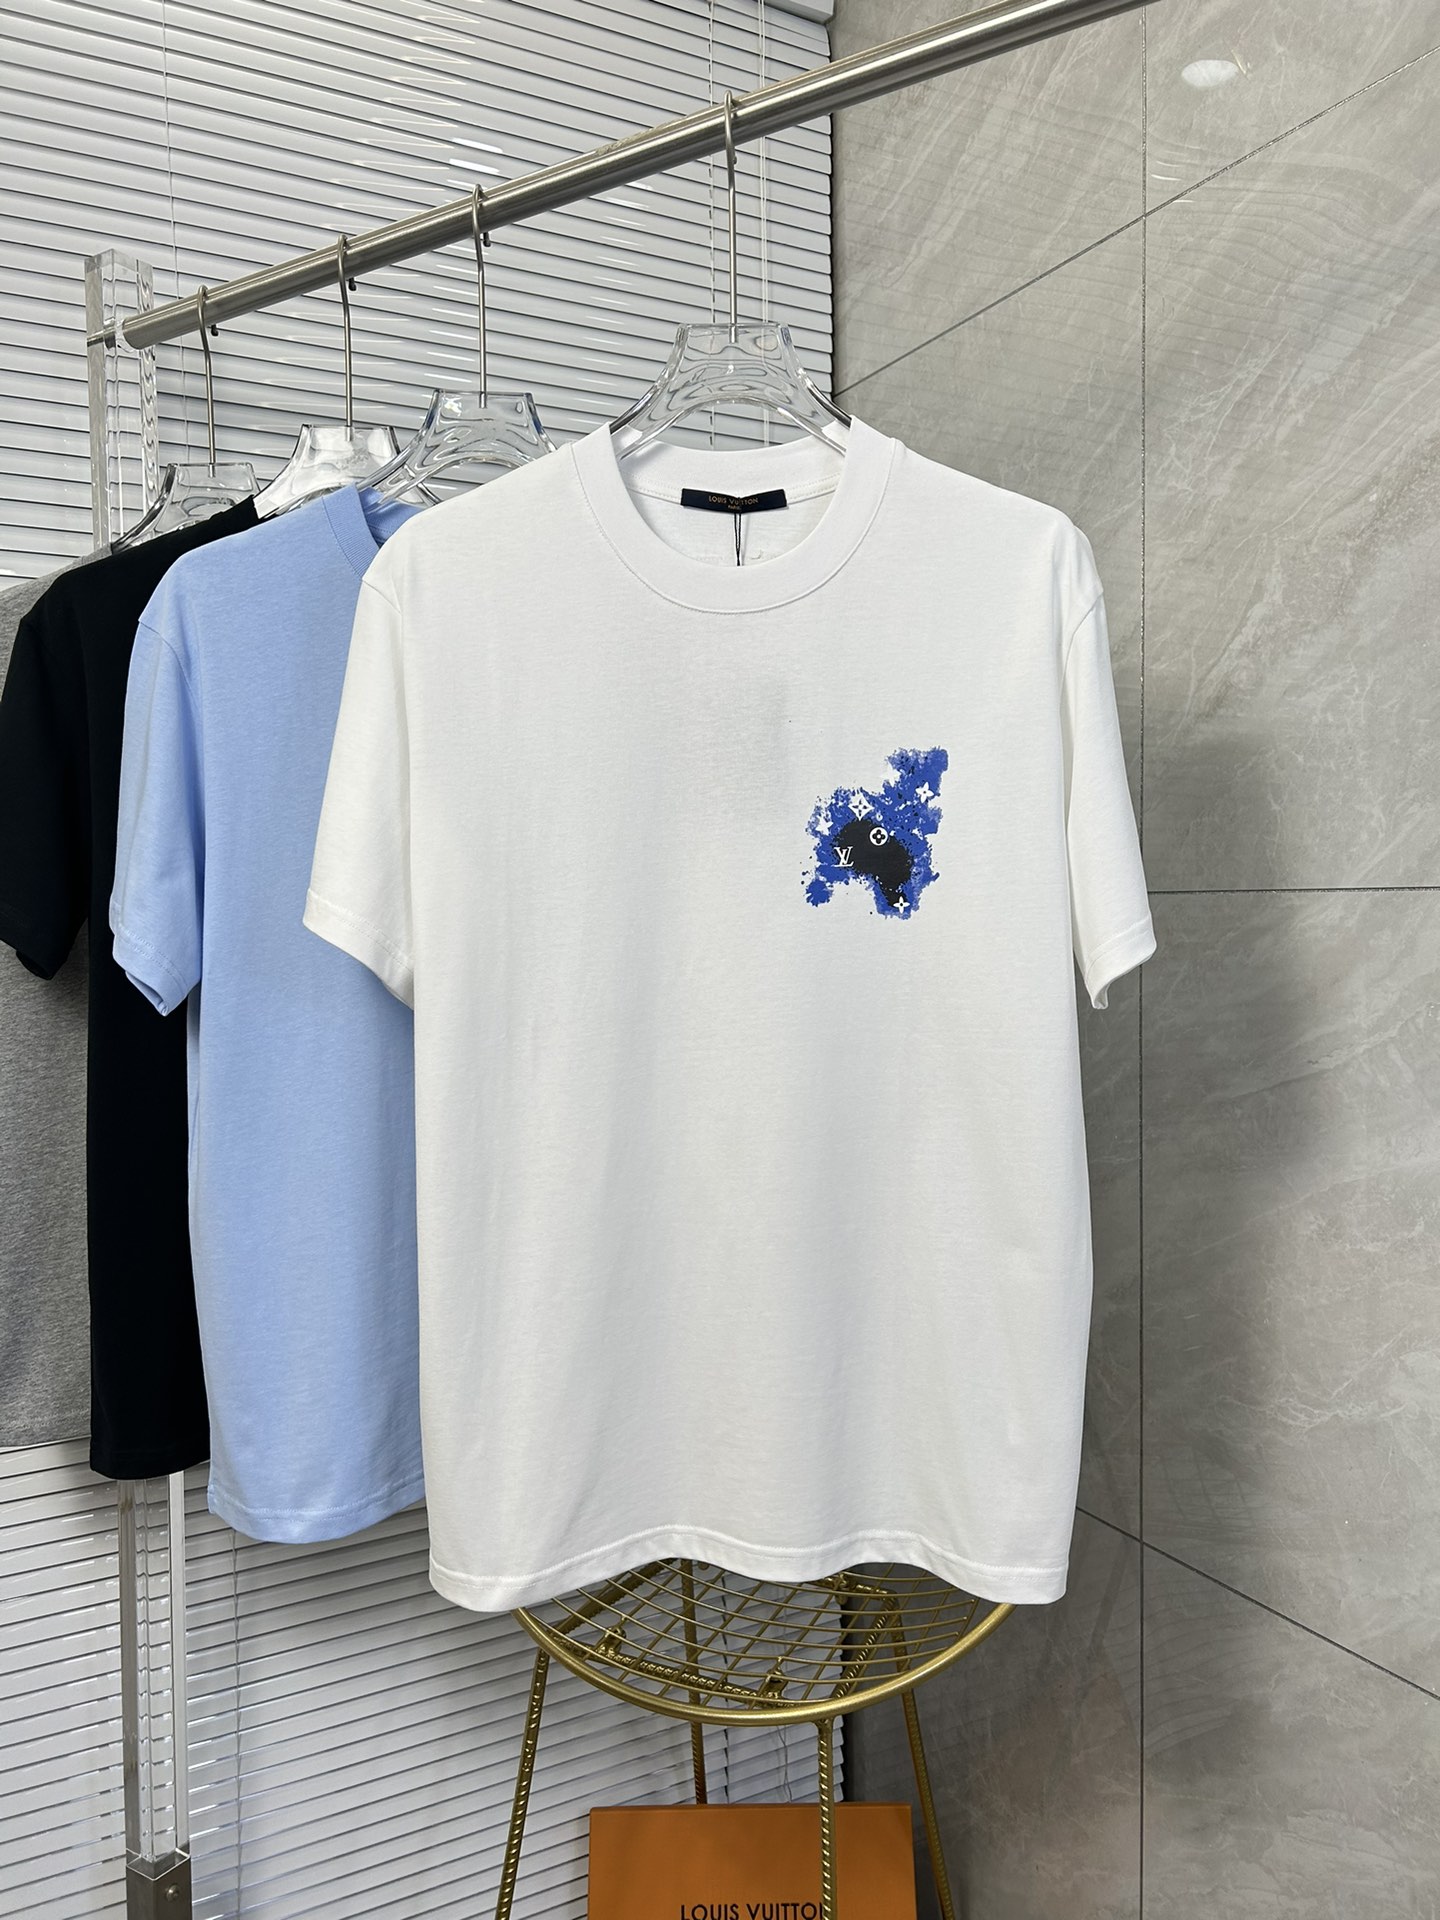 Is it illegal to buy dupe
 Louis Vuitton Clothing T-Shirt Every Designer
 Black Blue Grey Light White Printing Unisex Spring/Summer Collection Fashion Short Sleeve